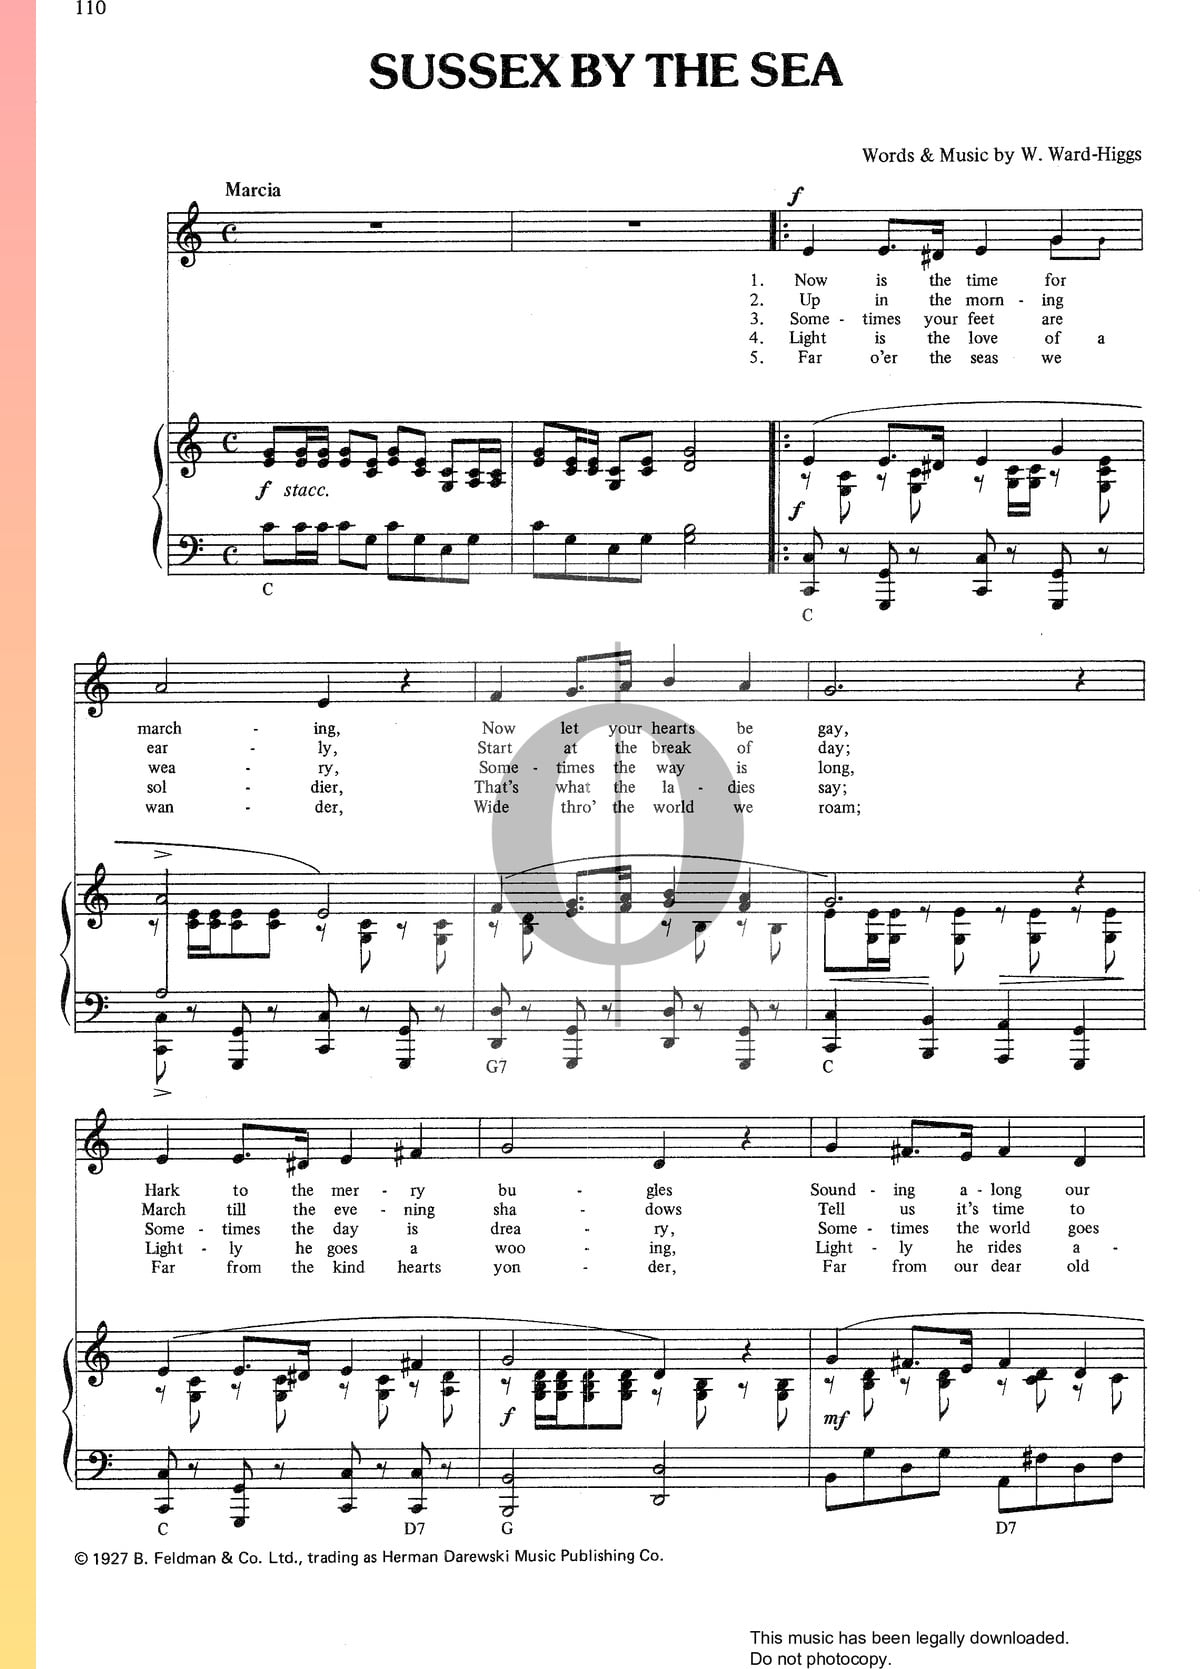 Sussex By The Sea Sheet Music (Piano, Voice) - OKTAV